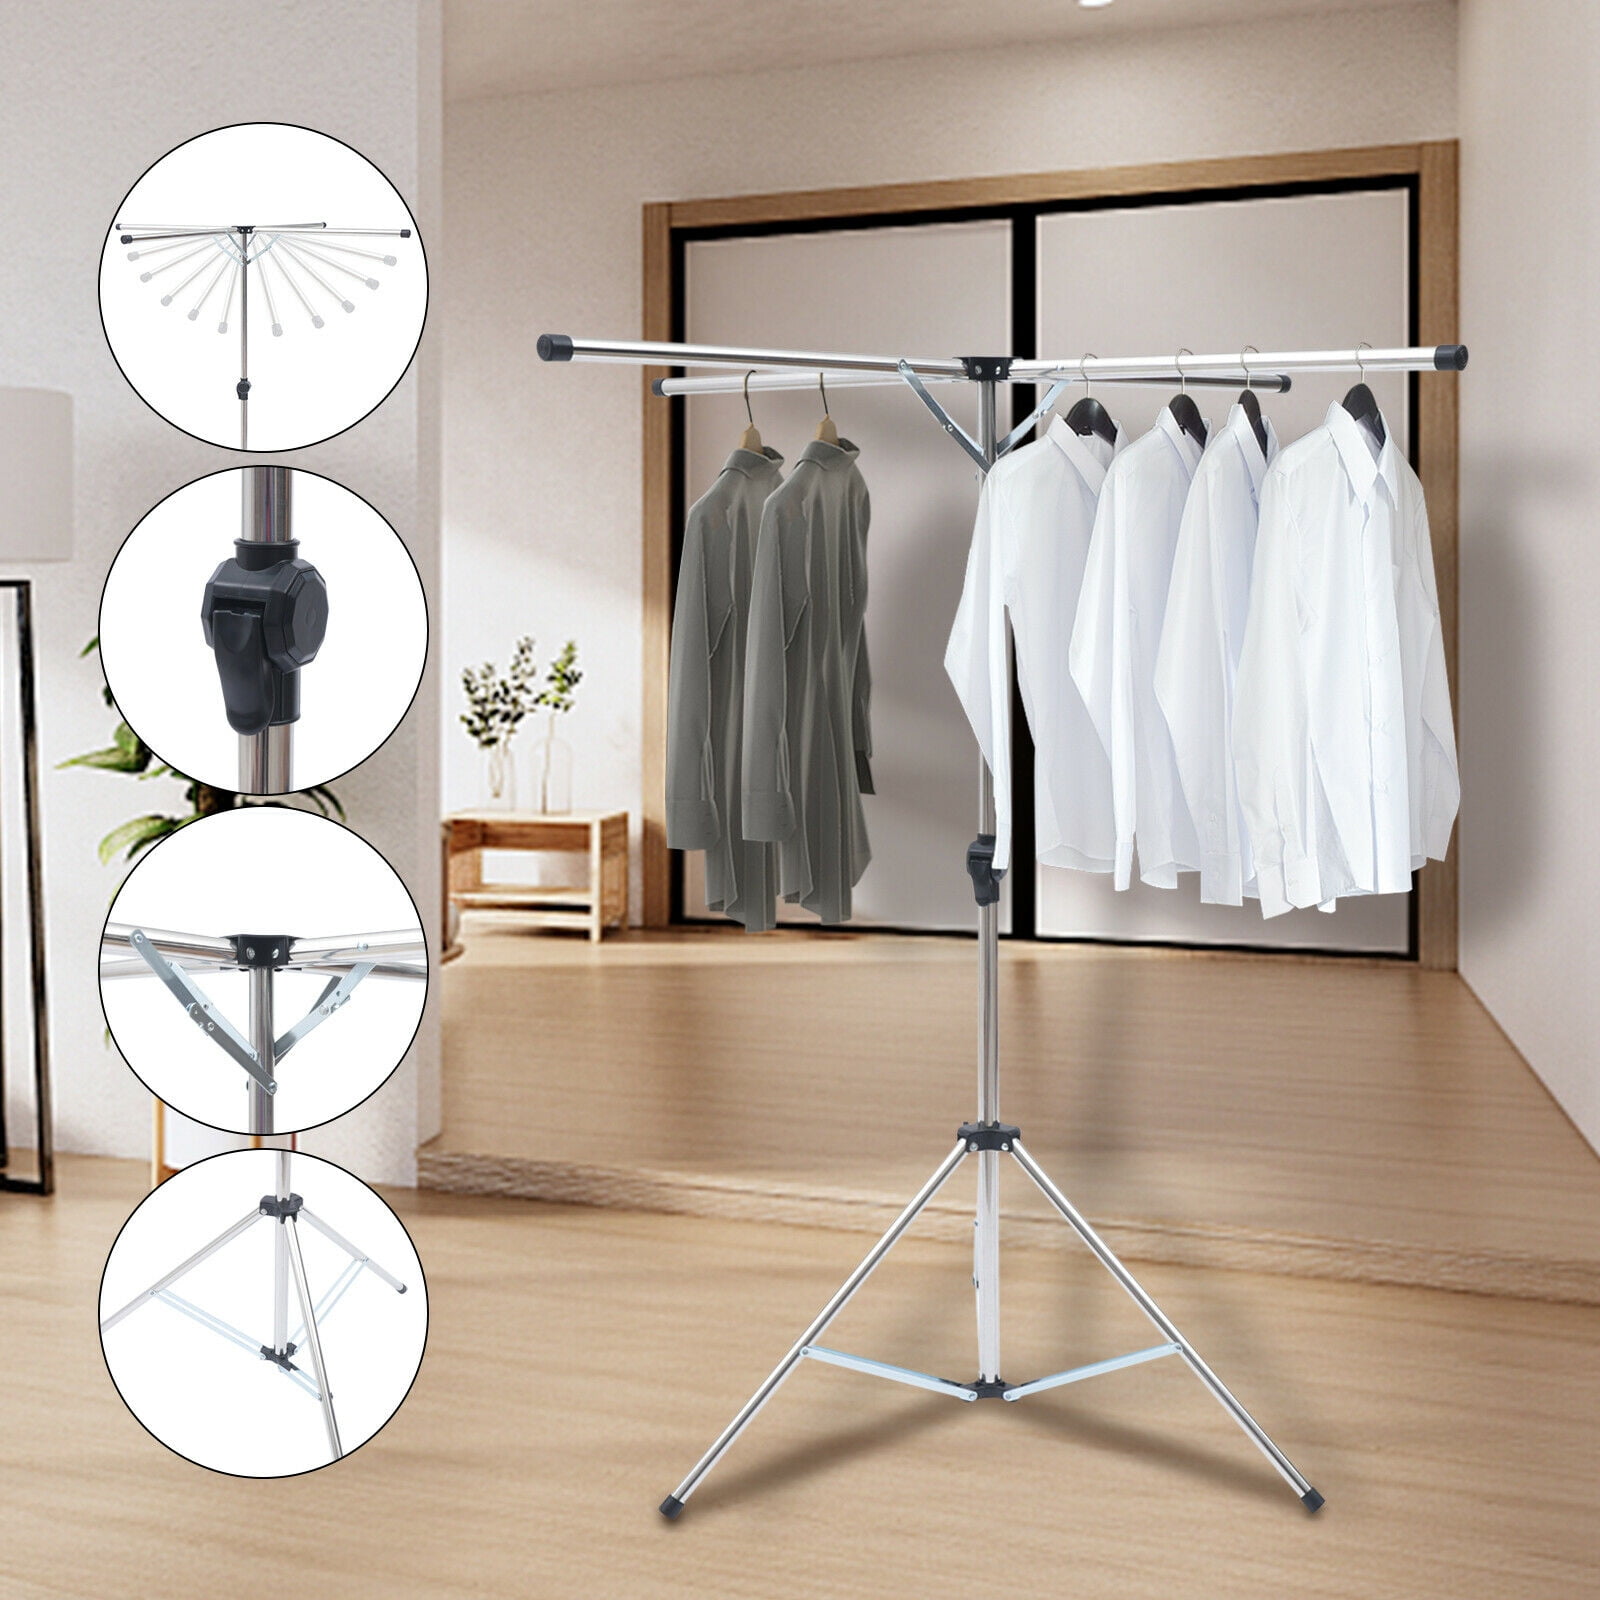 Foldable Portable Clothes Drying Rack,Adjustable Mental Drying Rack ...